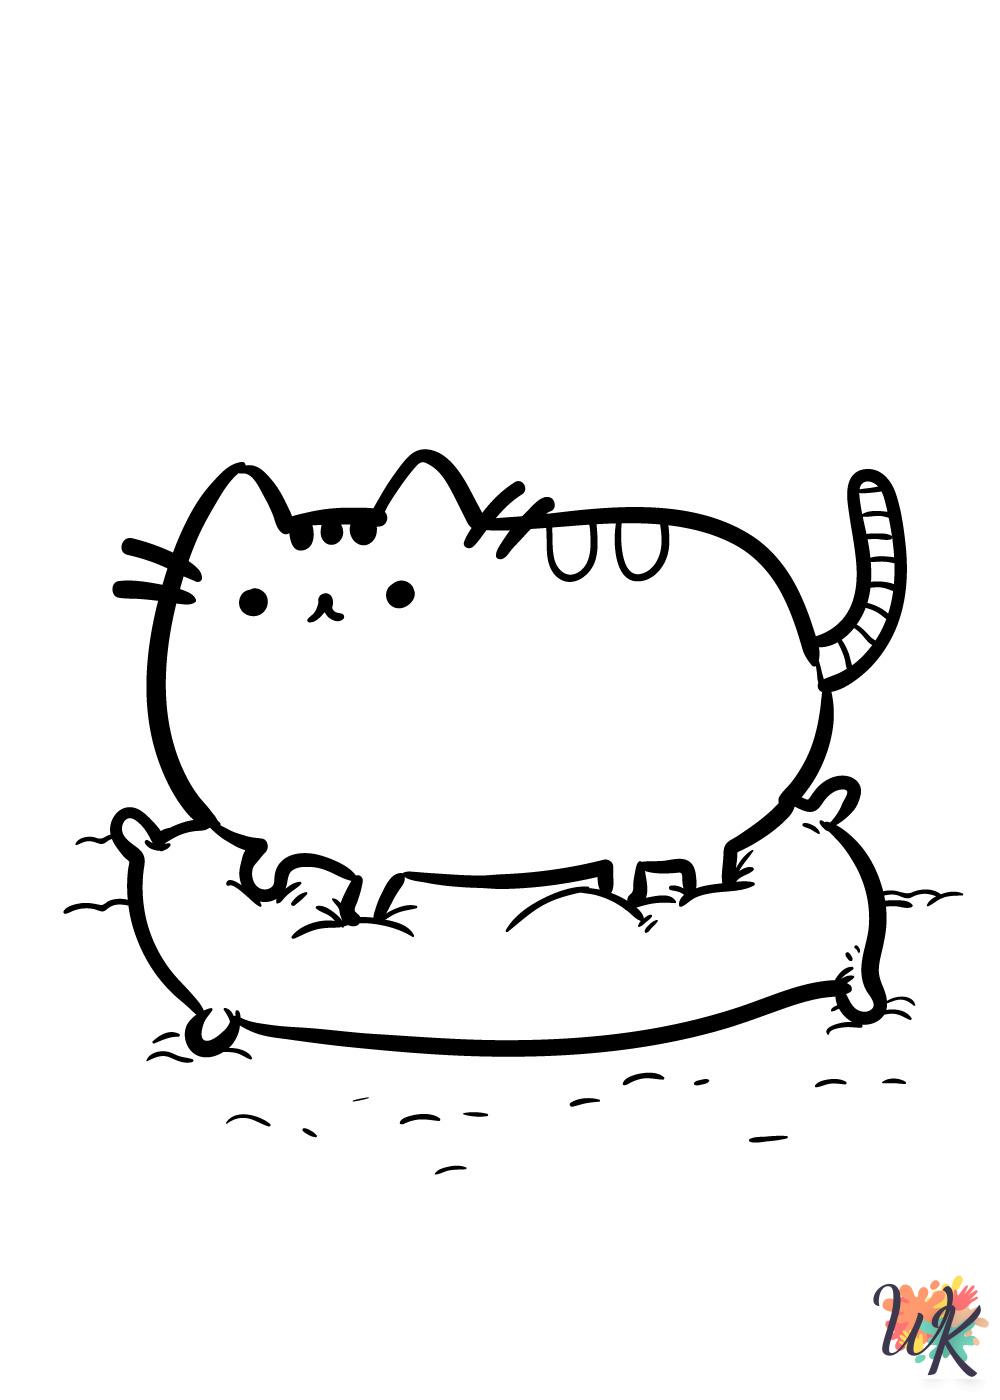 Pusheen coloring pages for adults pdf